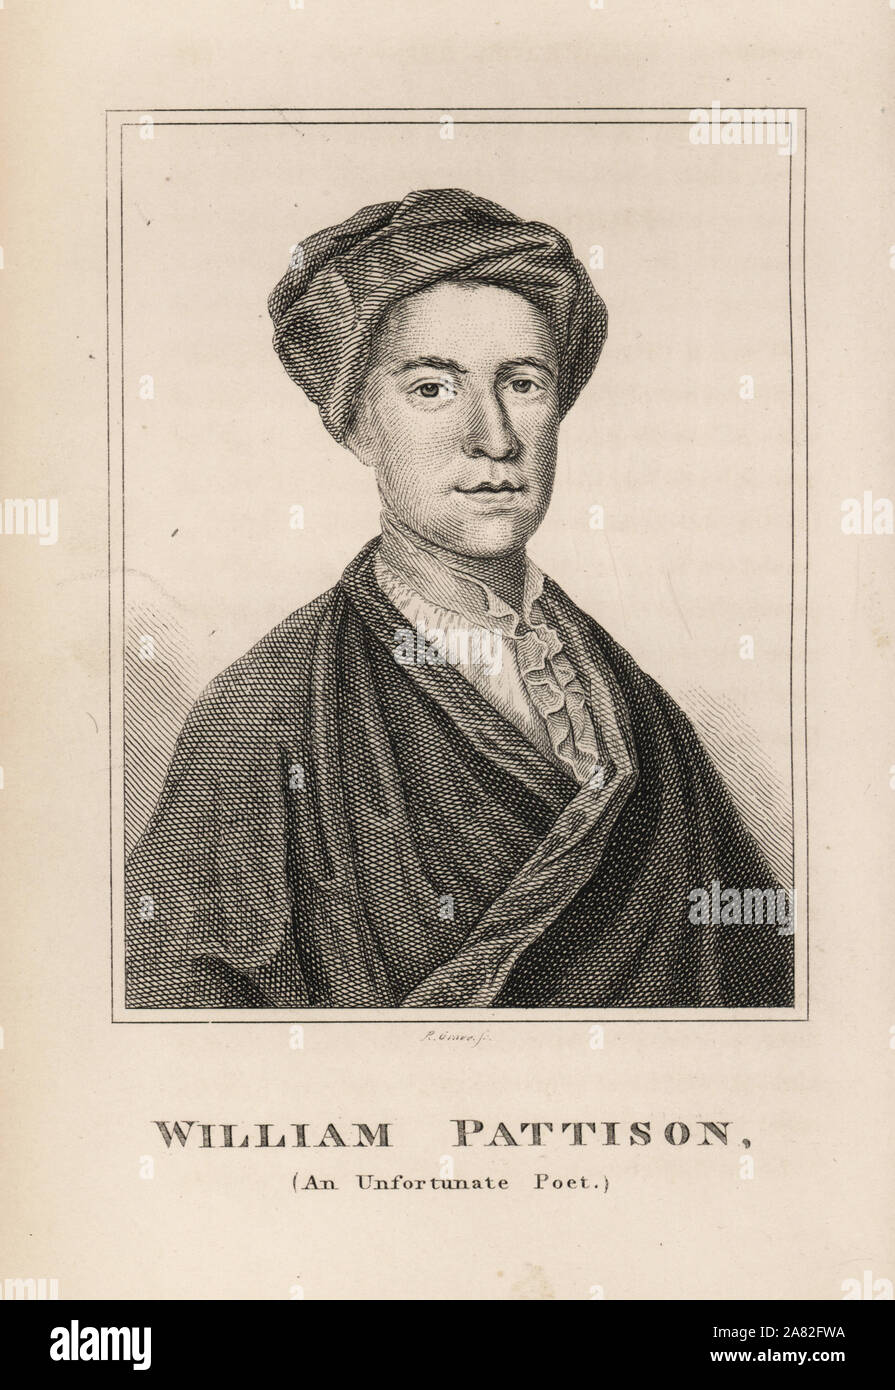 William Pattison, unfortunate young poet, died of the smallpox, 1706–1727. Engraving by R. Grave from James Caulfield's Portraits, Memoirs and Characters of Remarkable Persons, London, 1819. Stock Photo